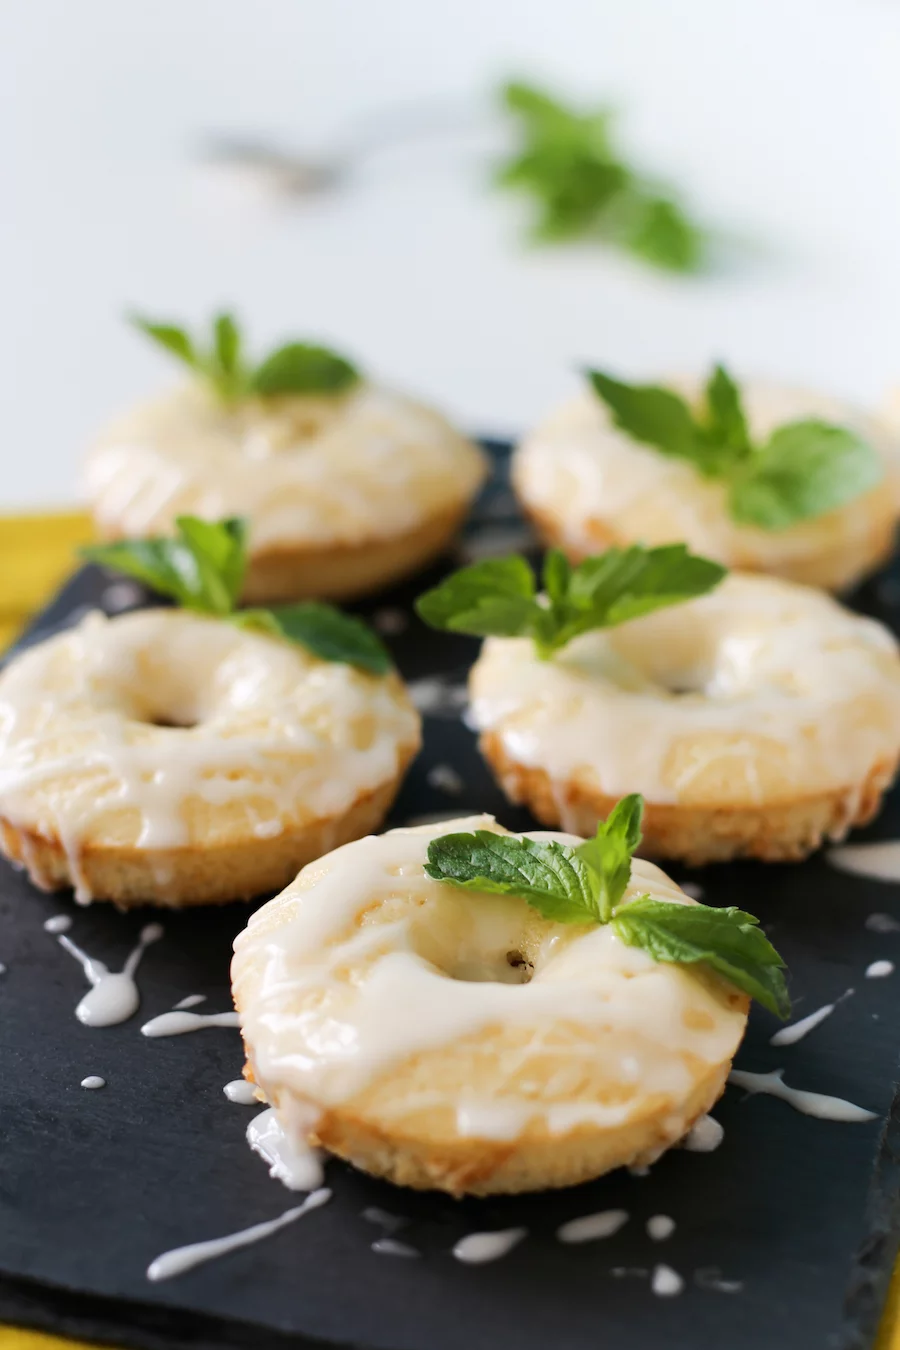 Celebrate the Kentucky Derby at home with these Mint Julep Donuts! A minty lemon baked donut with a delicious bourbon glaze! // saltycanary.com